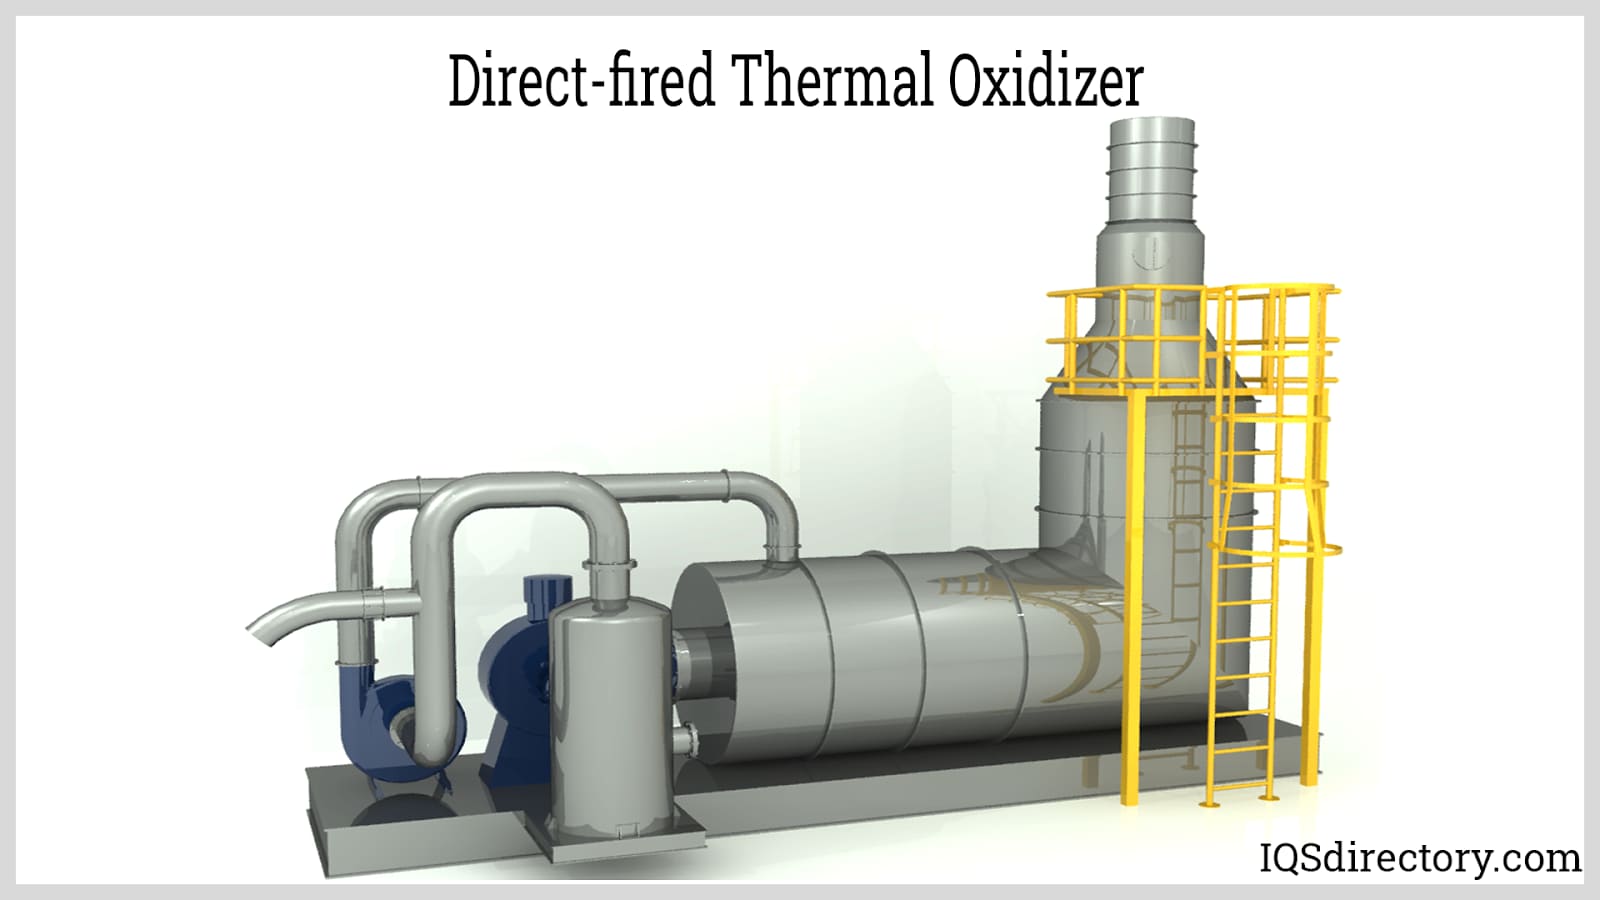 A Direct-Fired Thermal Oxidizers